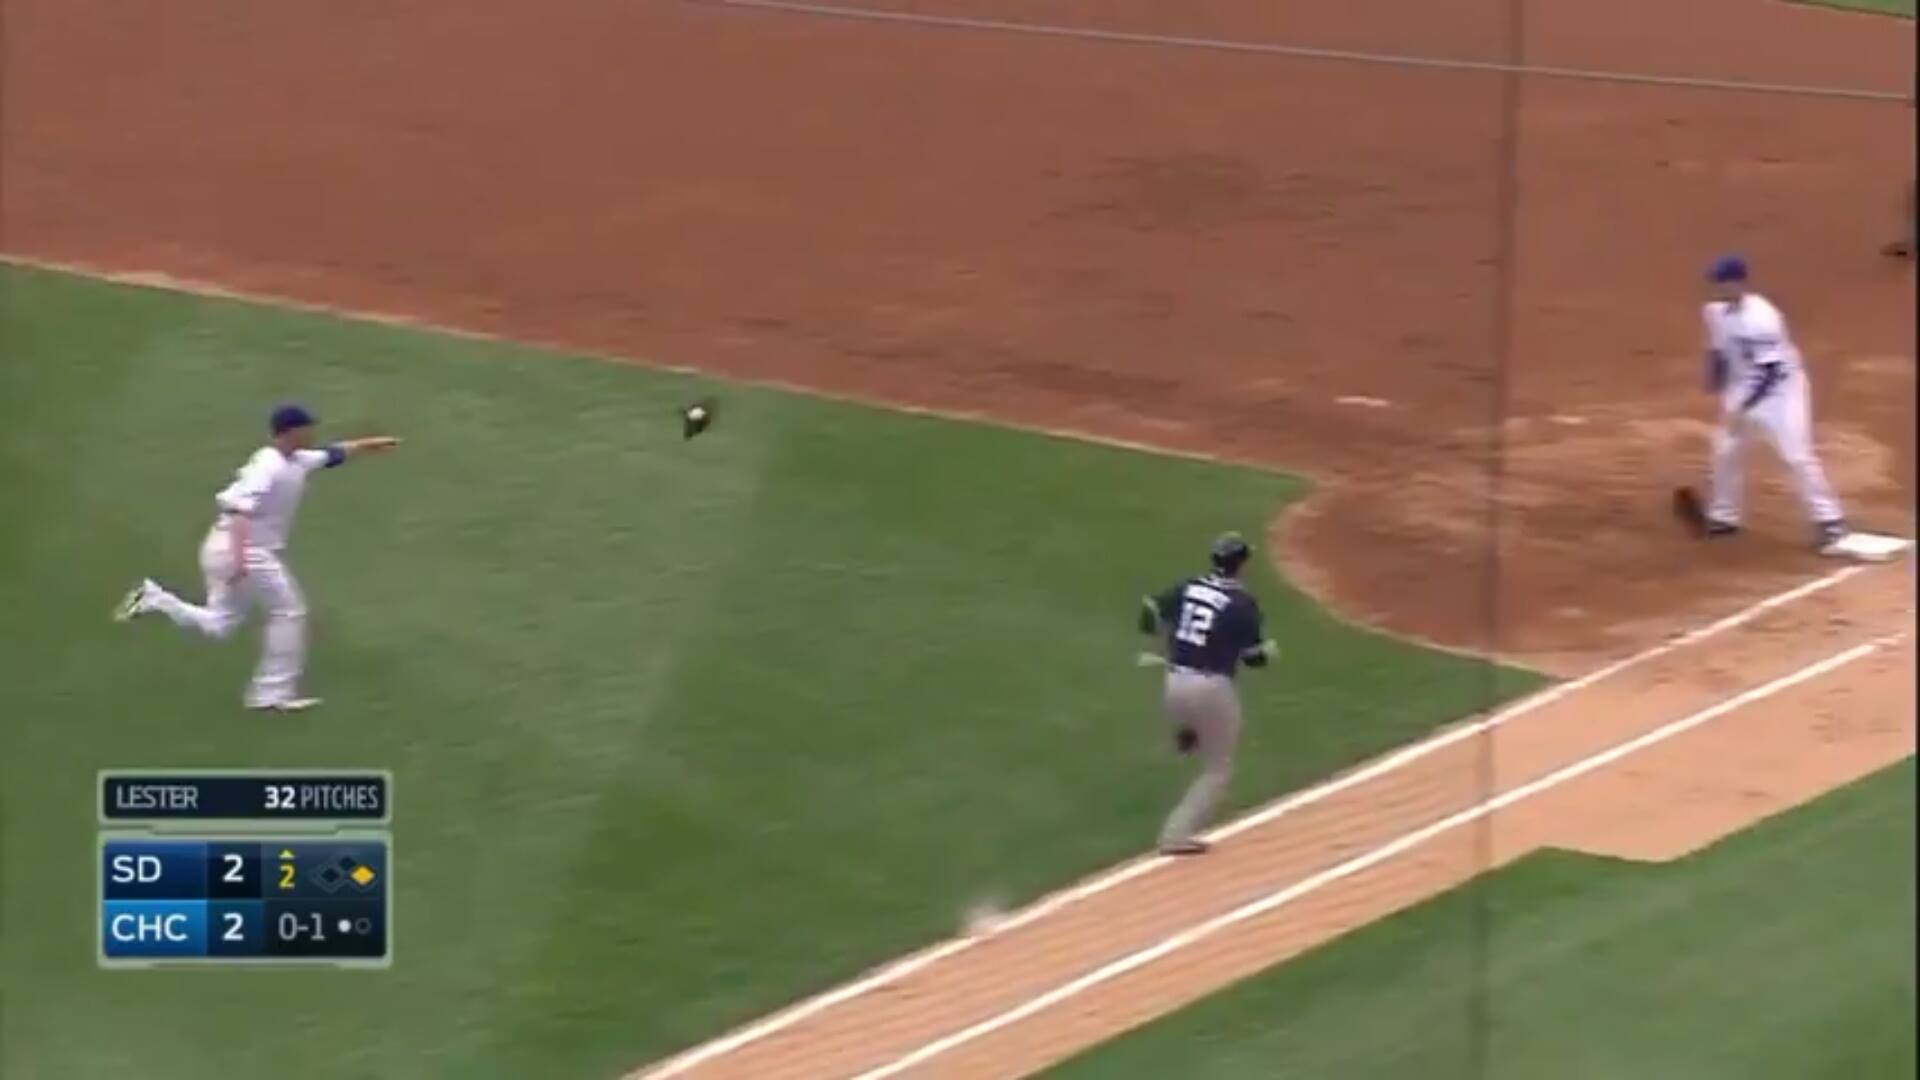 VIDEO: Jon Lester Throws Glove to First Base For Putout of Clint Barmes